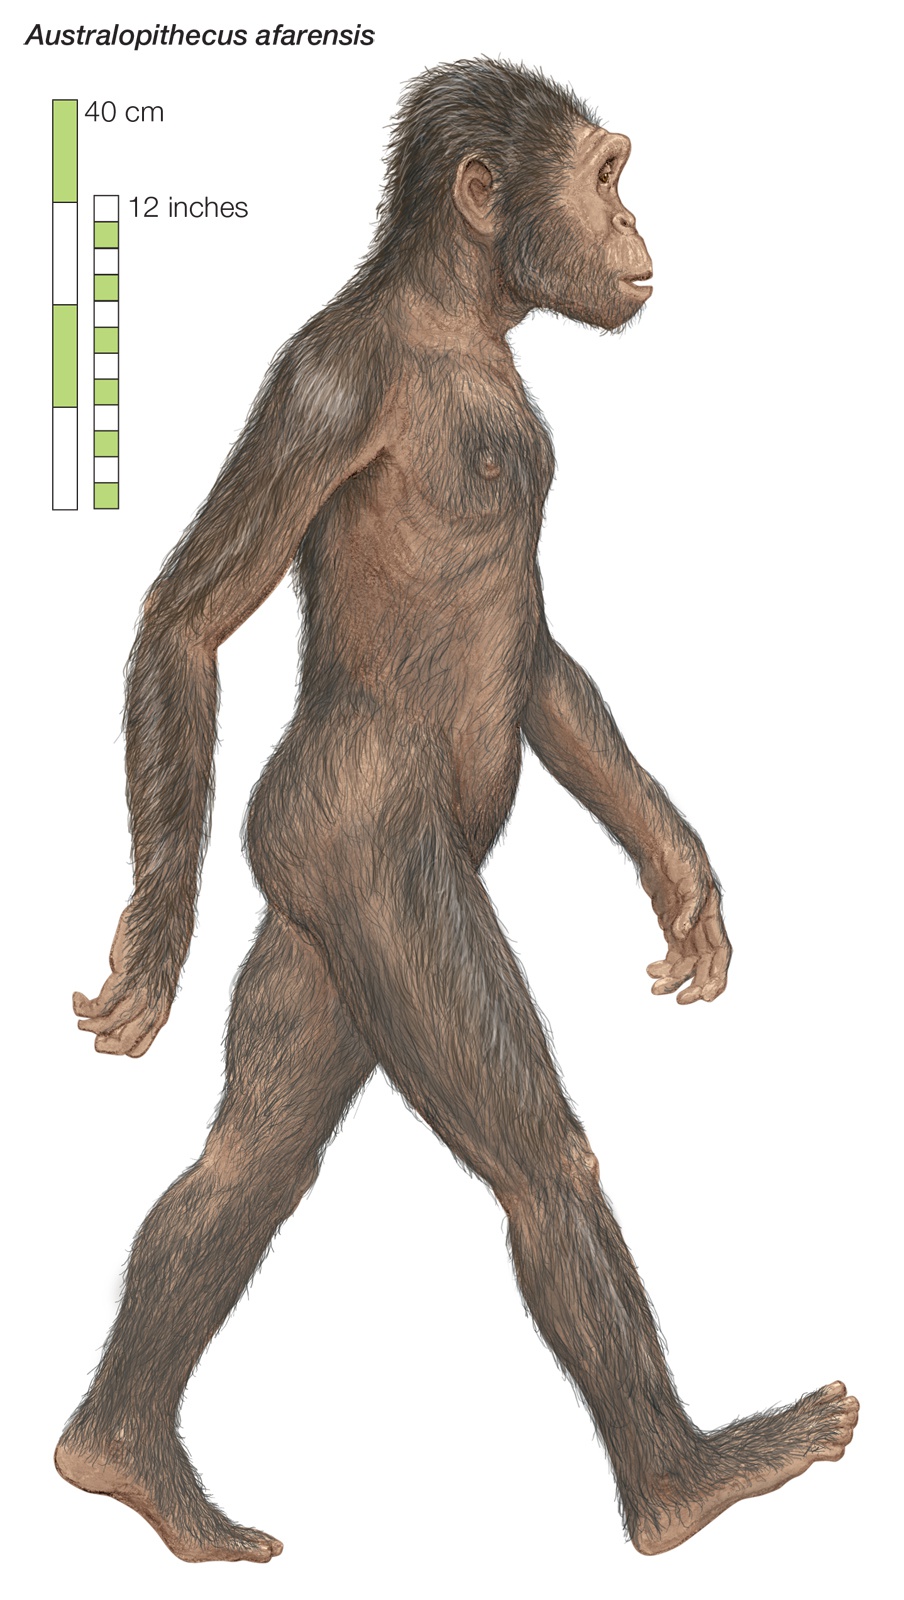 Is Australopithecus a hominid?